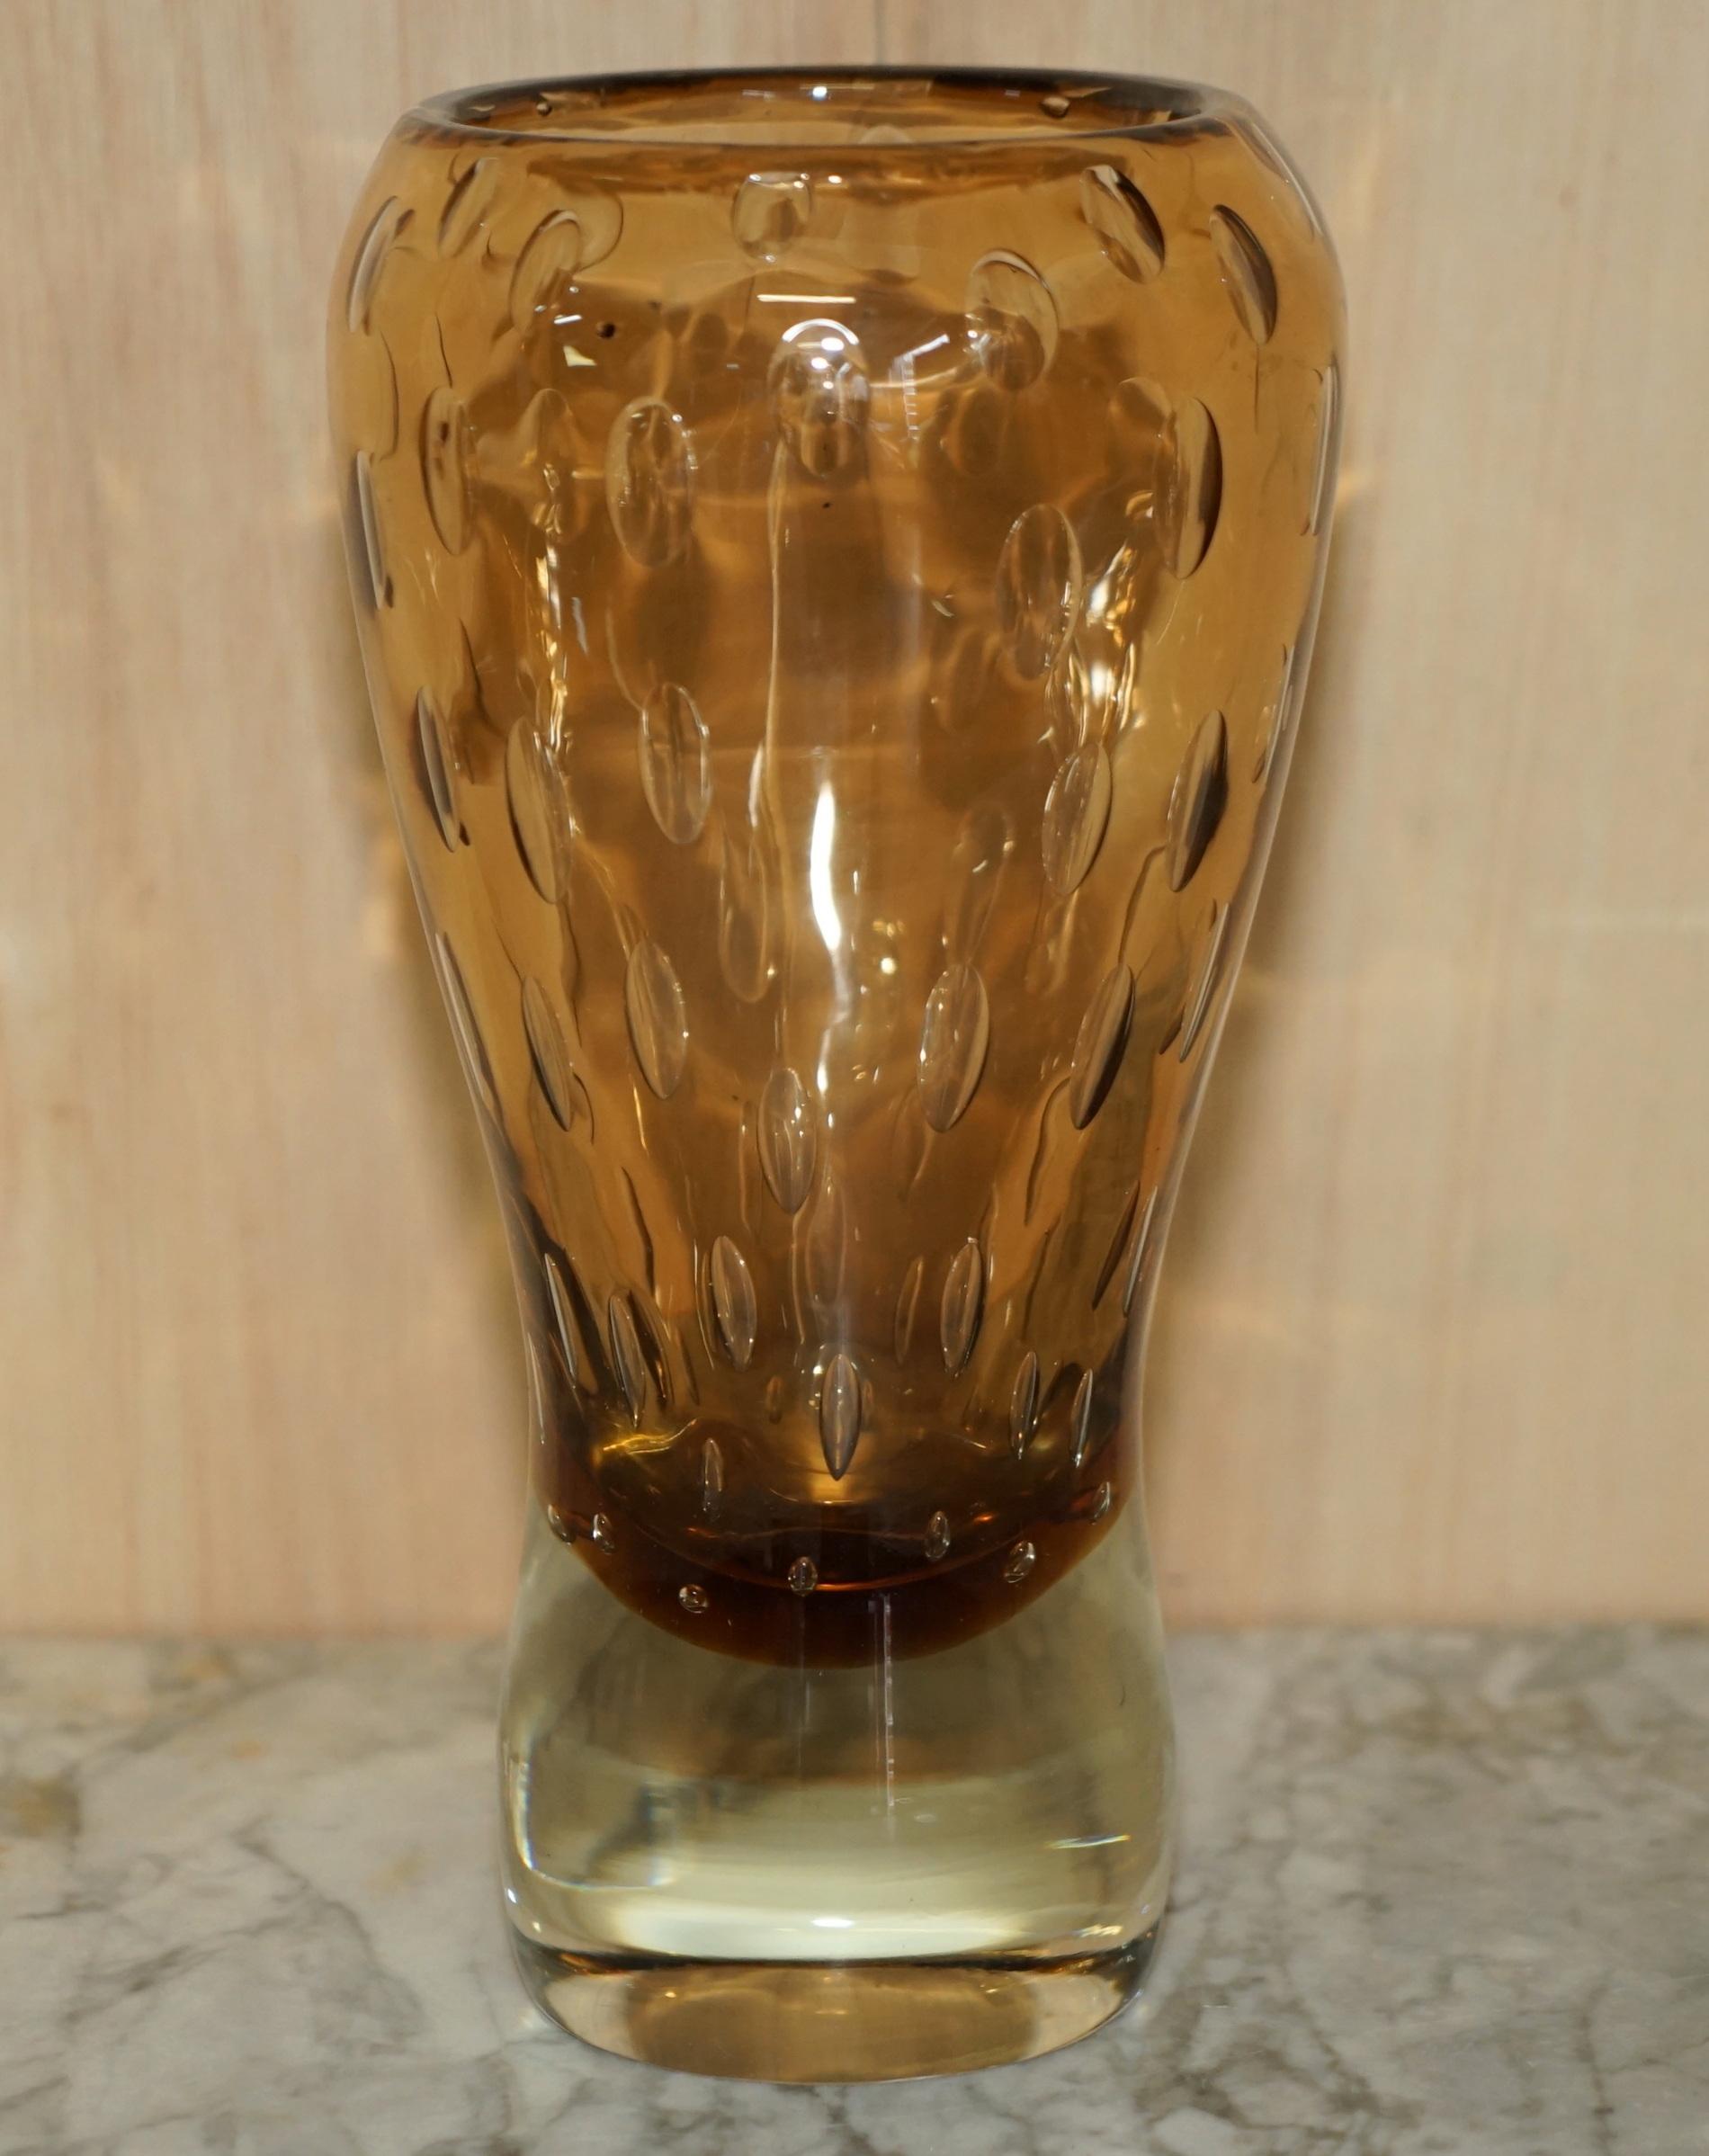 We are delighted to offer for sale this stunning one of a kind decorative floating bubble glass vase.

This piece looks sublime from every angle, it doesn’t have any damage that I can see, it is very decorative.

Dimensions

Height:-